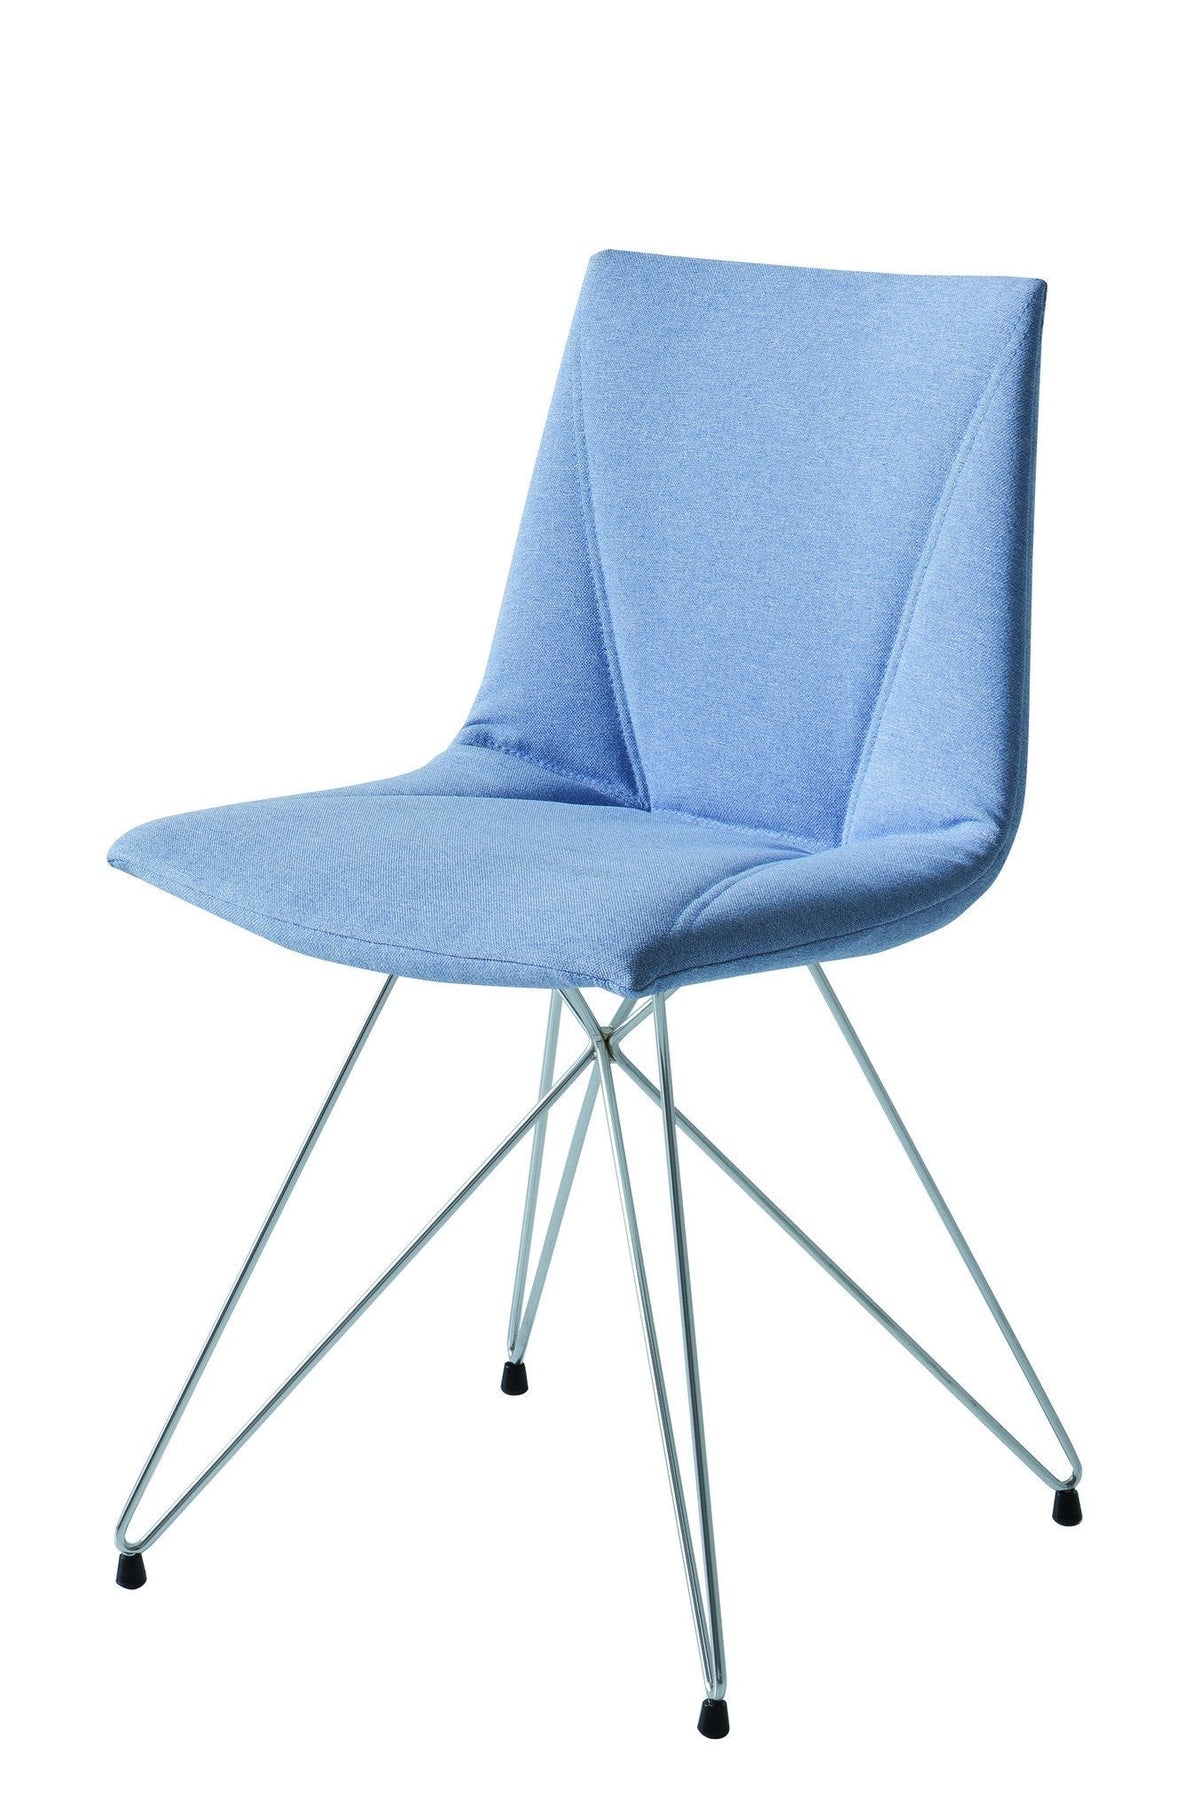 Colorfive Side Chair c/w Eiffel Base-Gaber-Contract Furniture Store